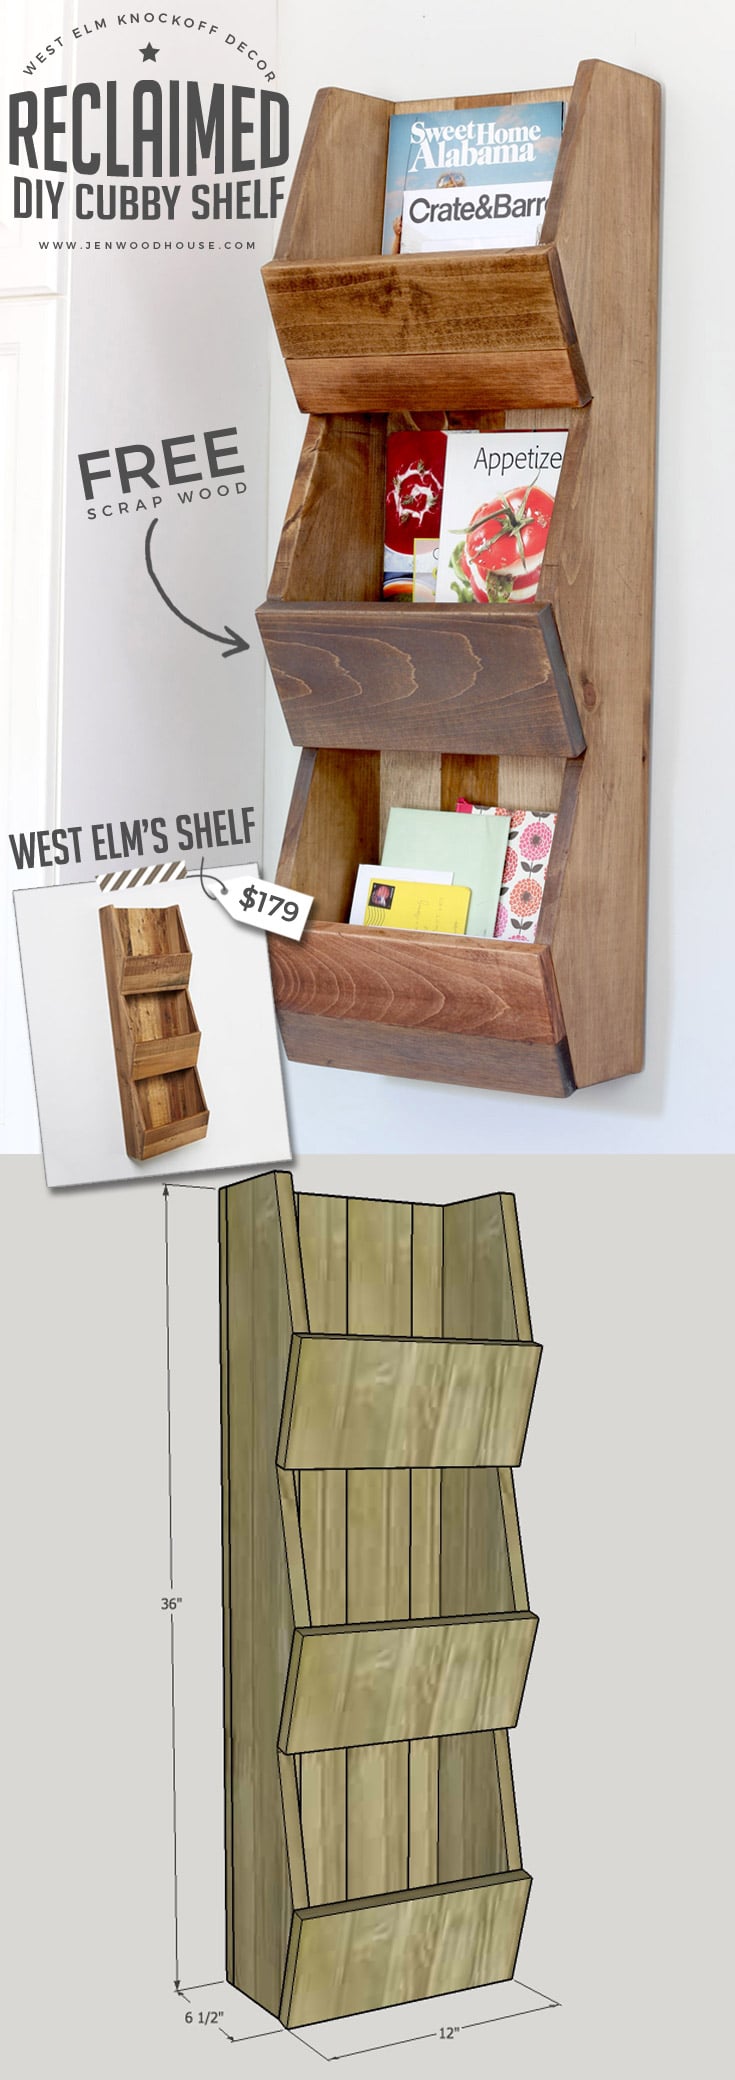 LOVE THIS! Tutorial on how to build a DIY West Elm knockoff cubby shelf. Build it out of scrap wood! #DIY #WestElm #WestElmKnockoffs #woodworking, #shelf #cubby